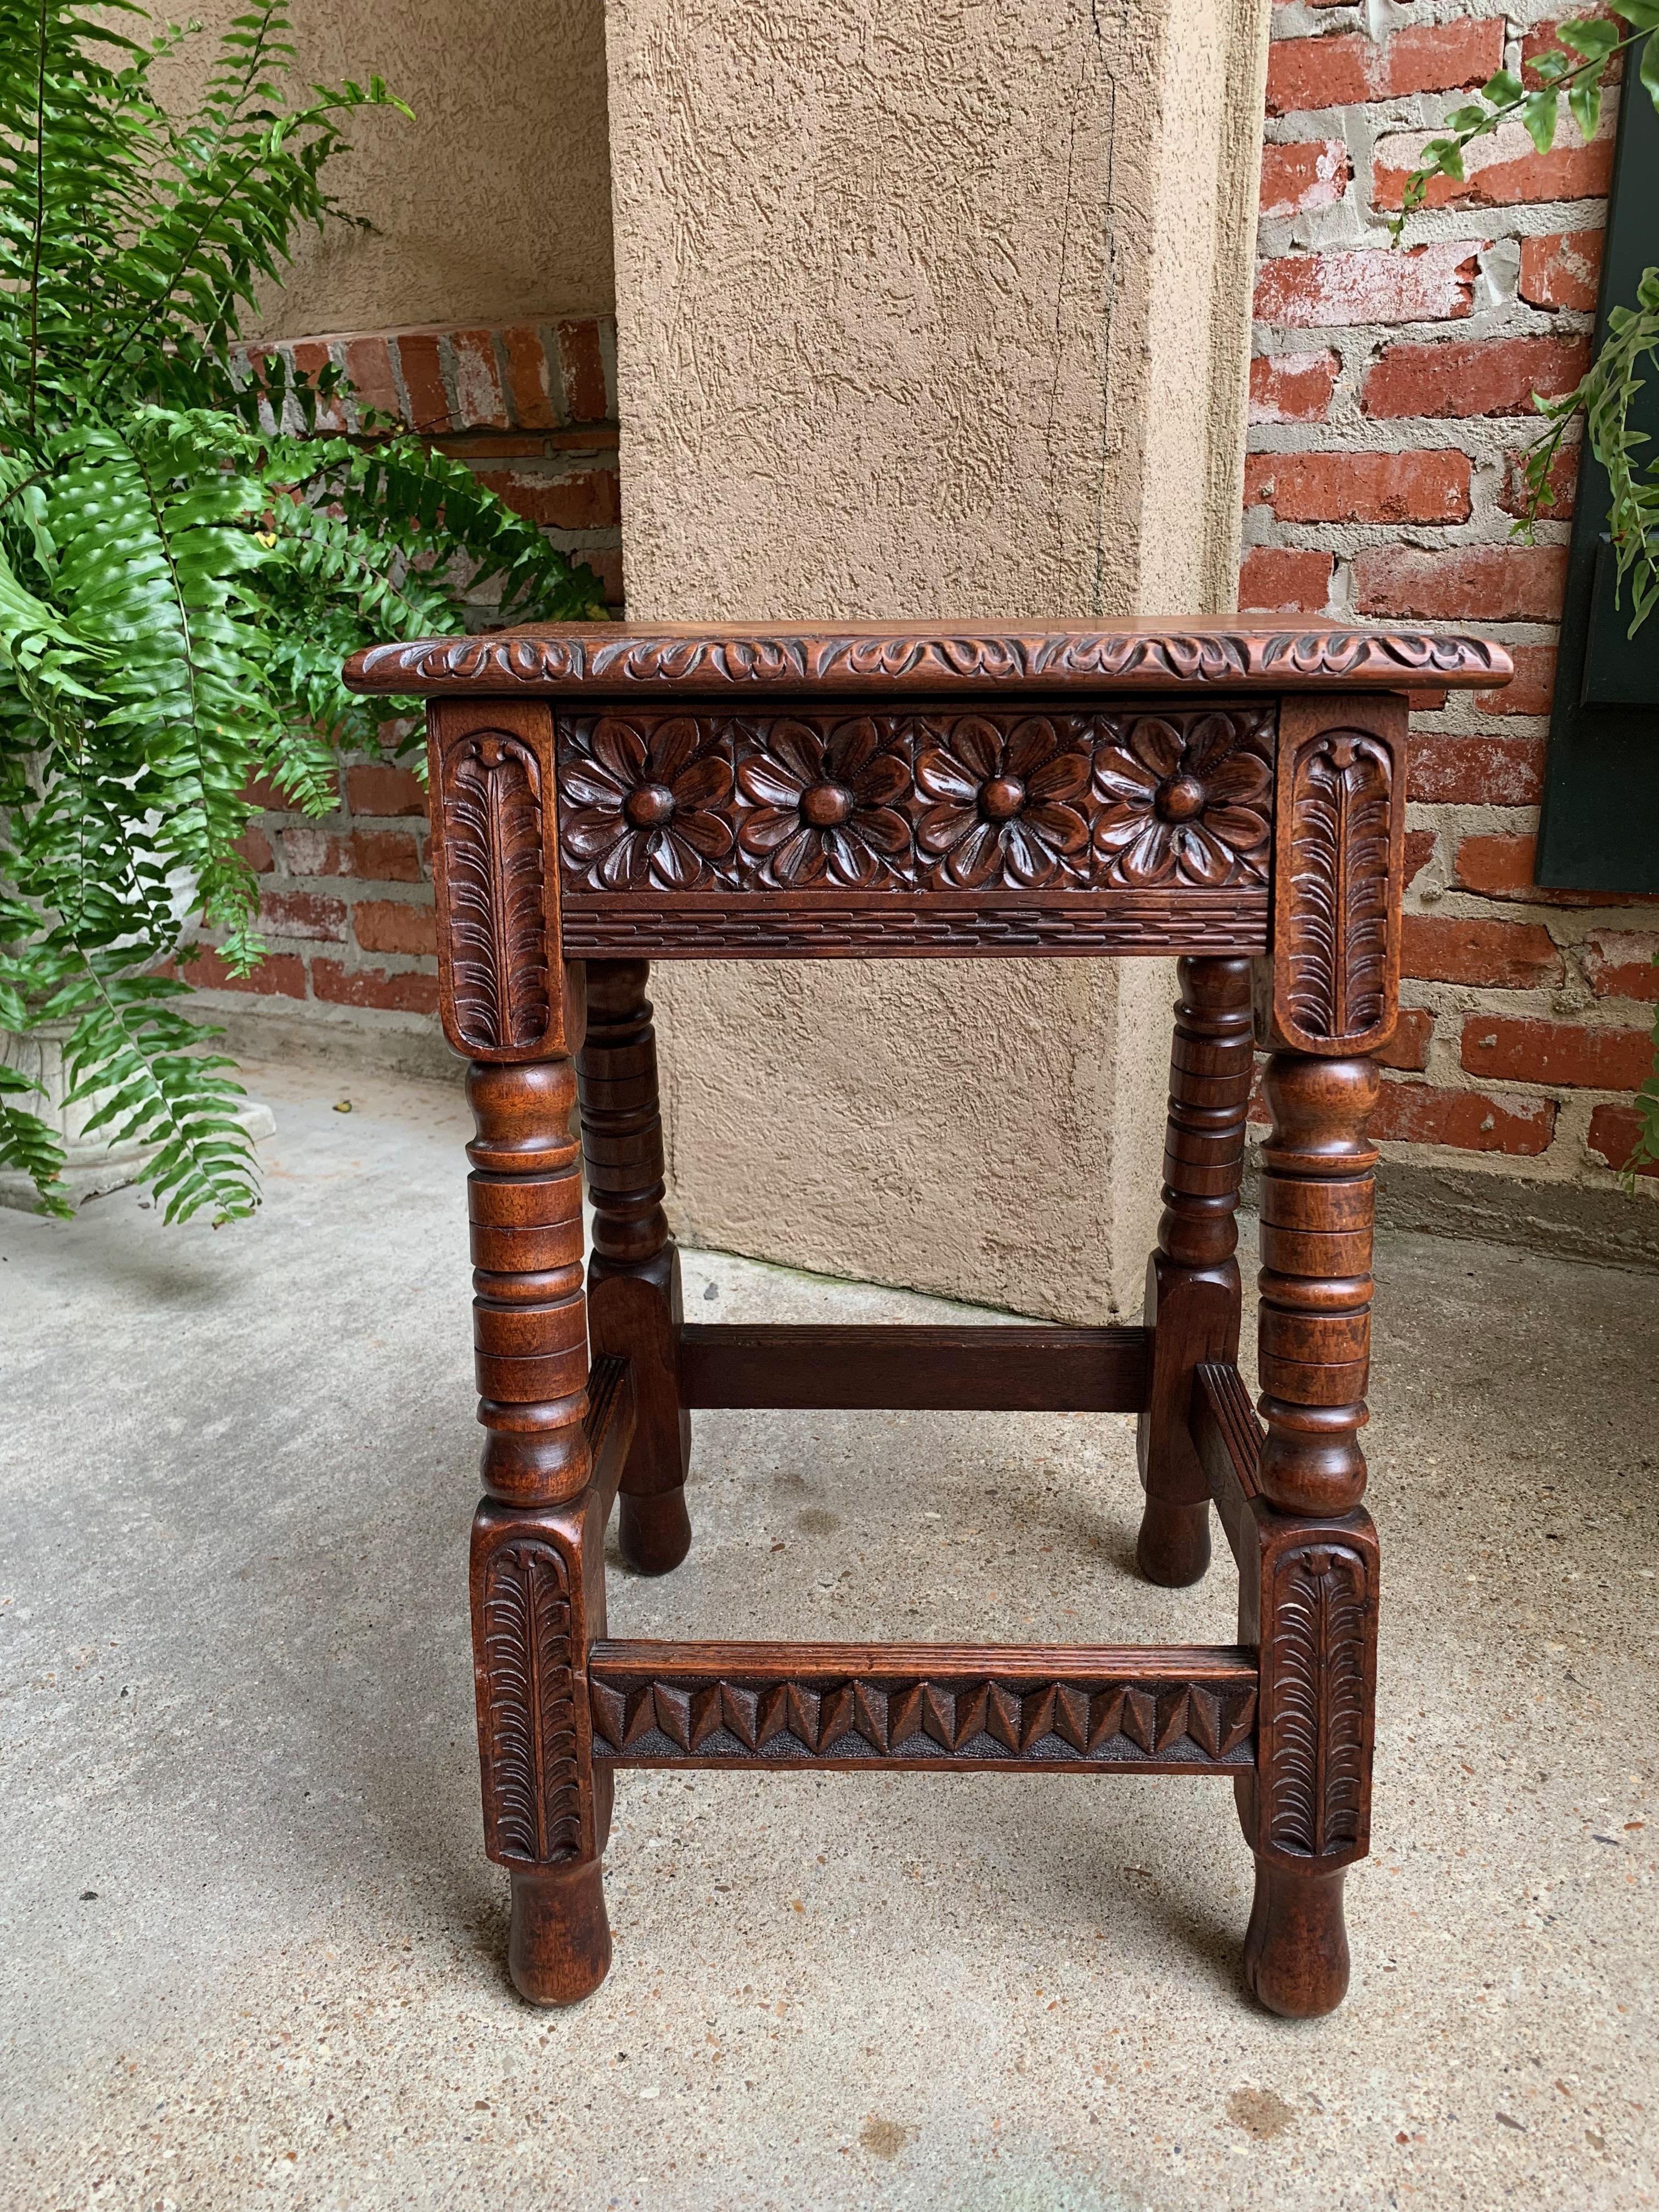 British Antique English Carved Oak Joint Stool Bench Table Lift Top Splayed Leg c1900